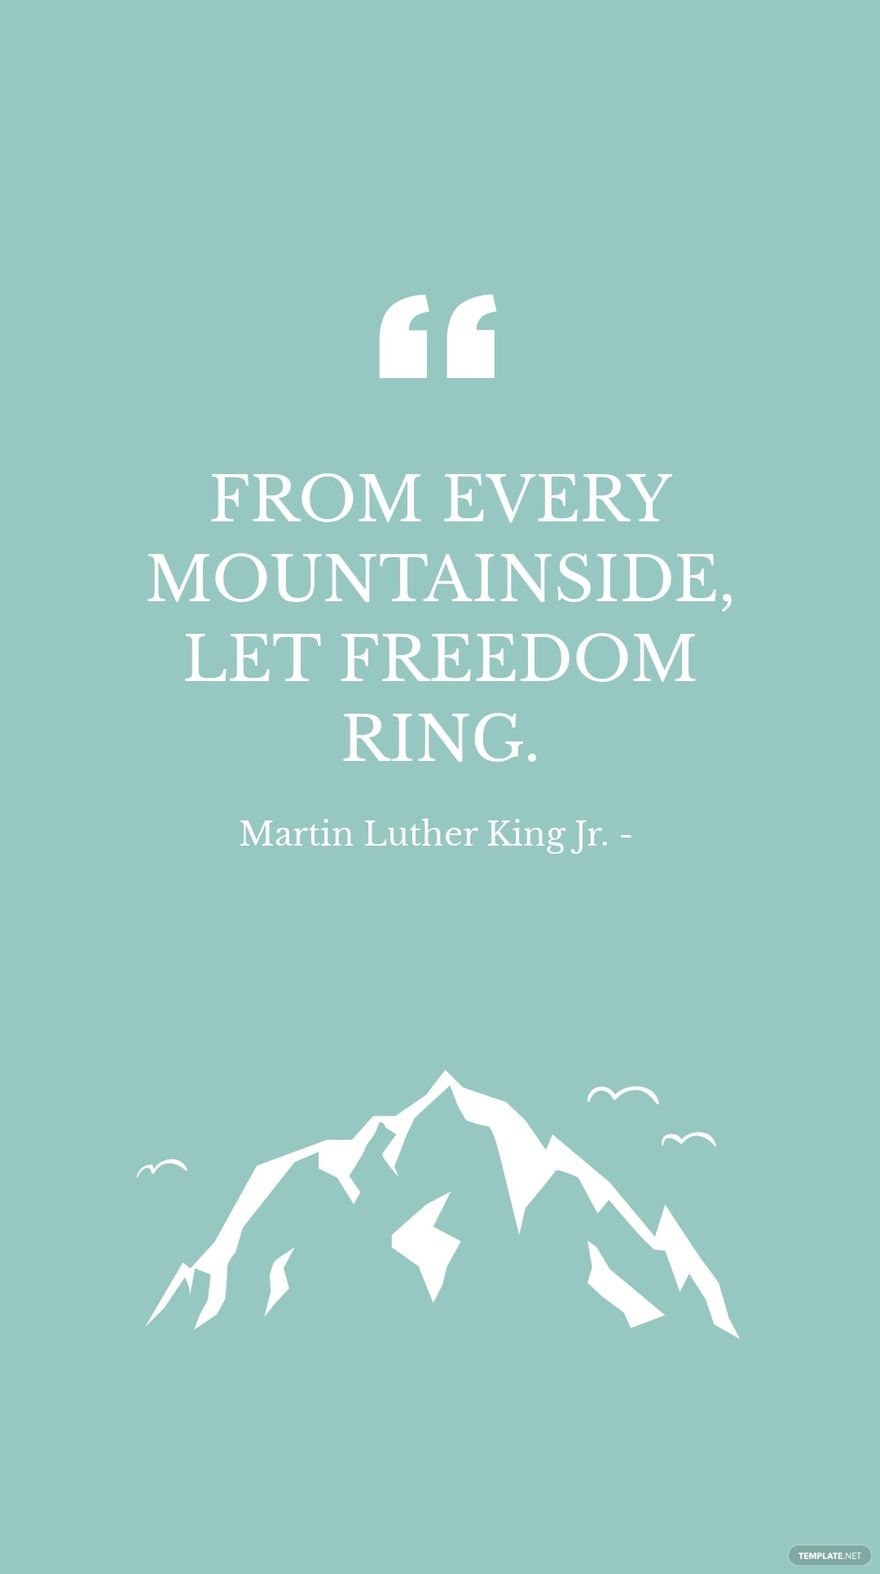 Martin Luther King Jr. - From every mountainside, let freedom ring.